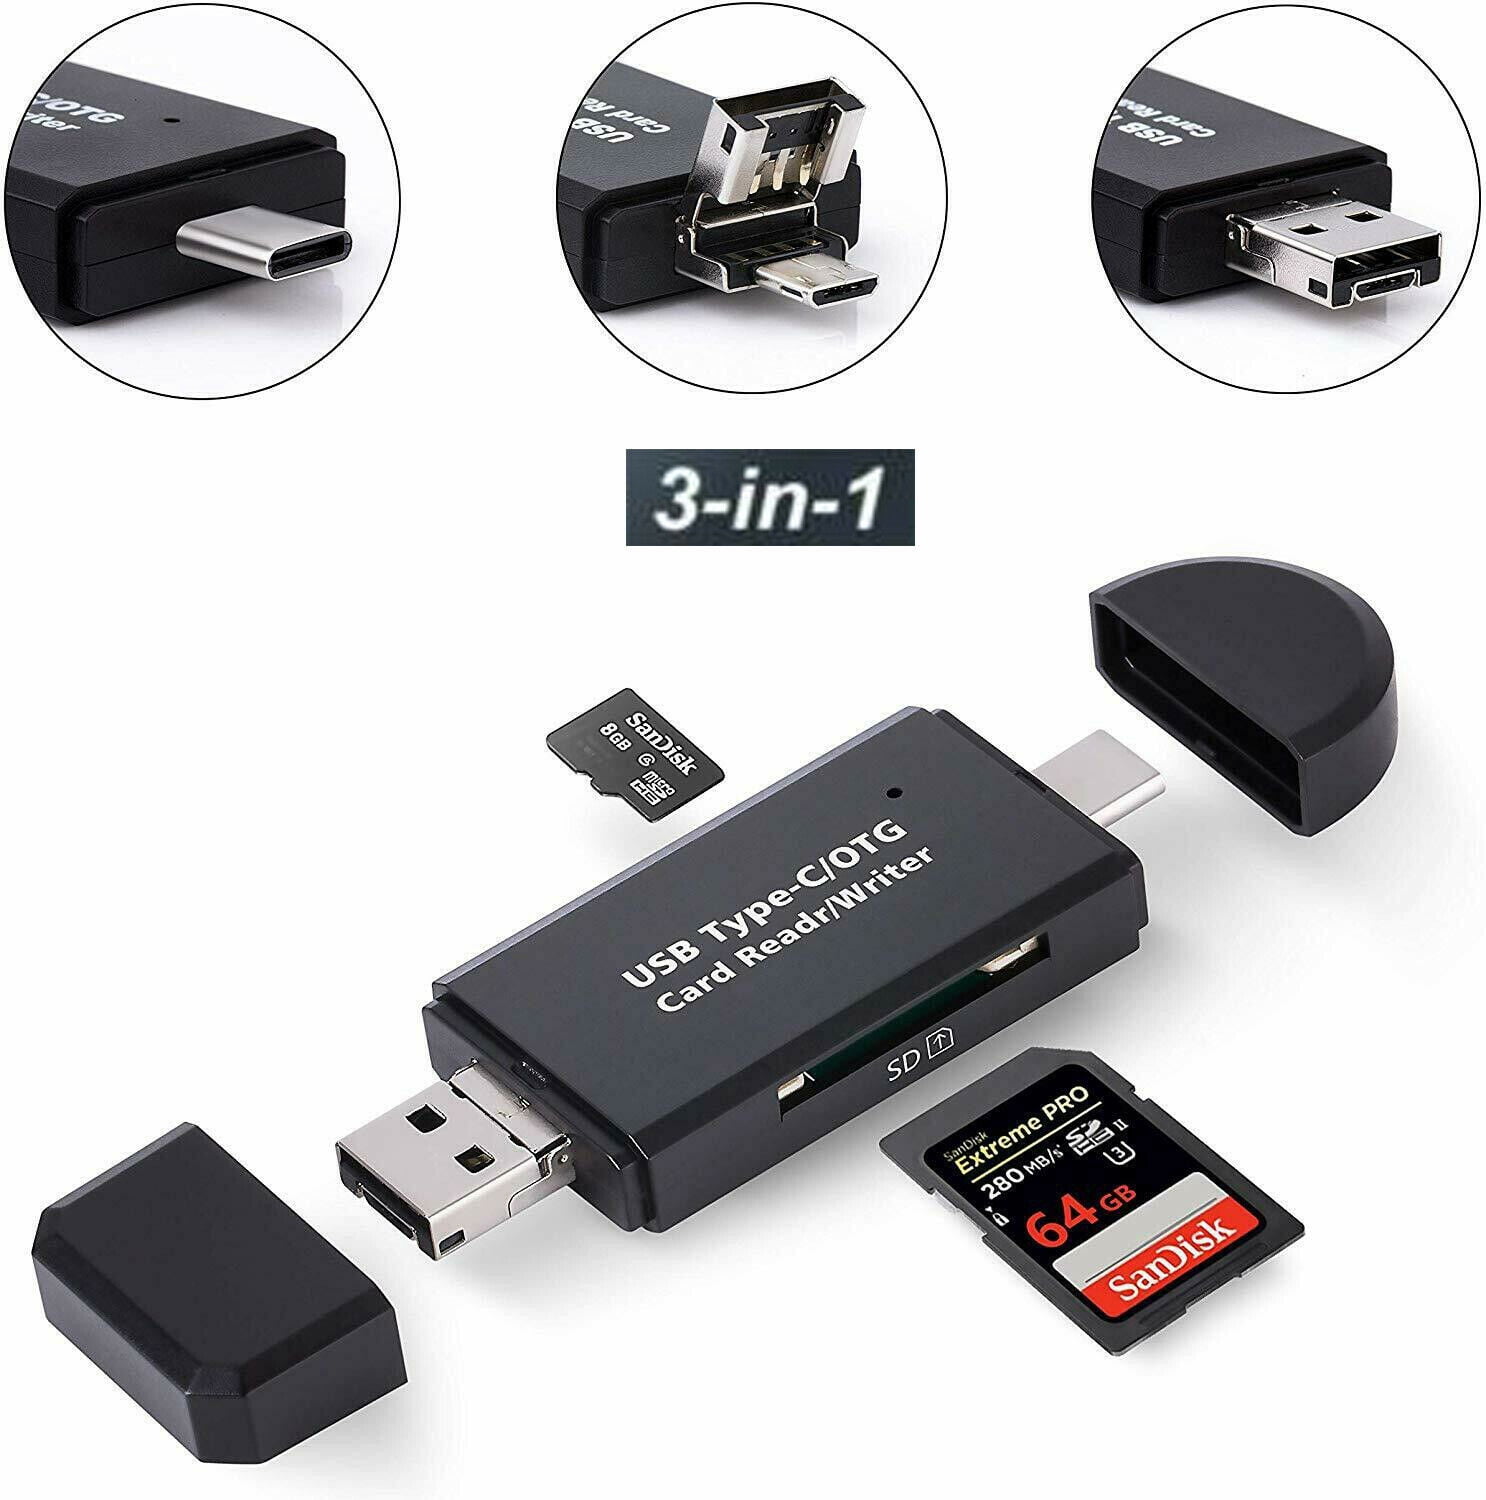 Varme vand blomsten Stolpe USB 2.0 Portable Card Reader for SDXC, SDHC, SD, MMC, RS-MMC, All-in-One  Design - USB 3.0 Micro SD and SD Card Reader - Walmart.com